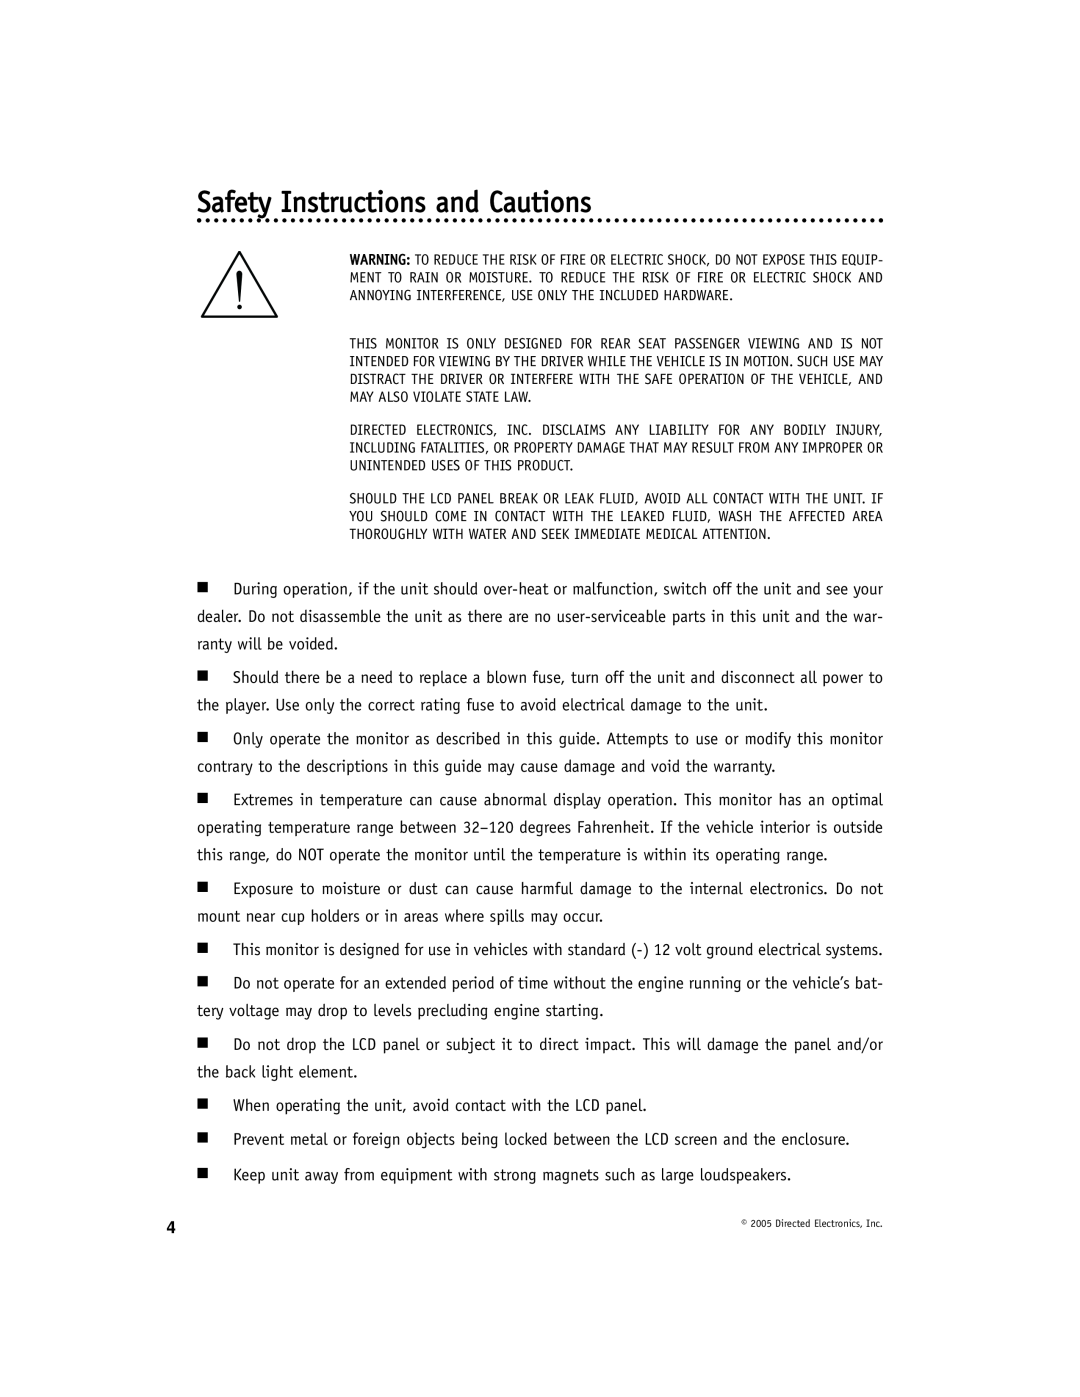 Directed Video OHW17 manual Safety Instructions and Cautions 